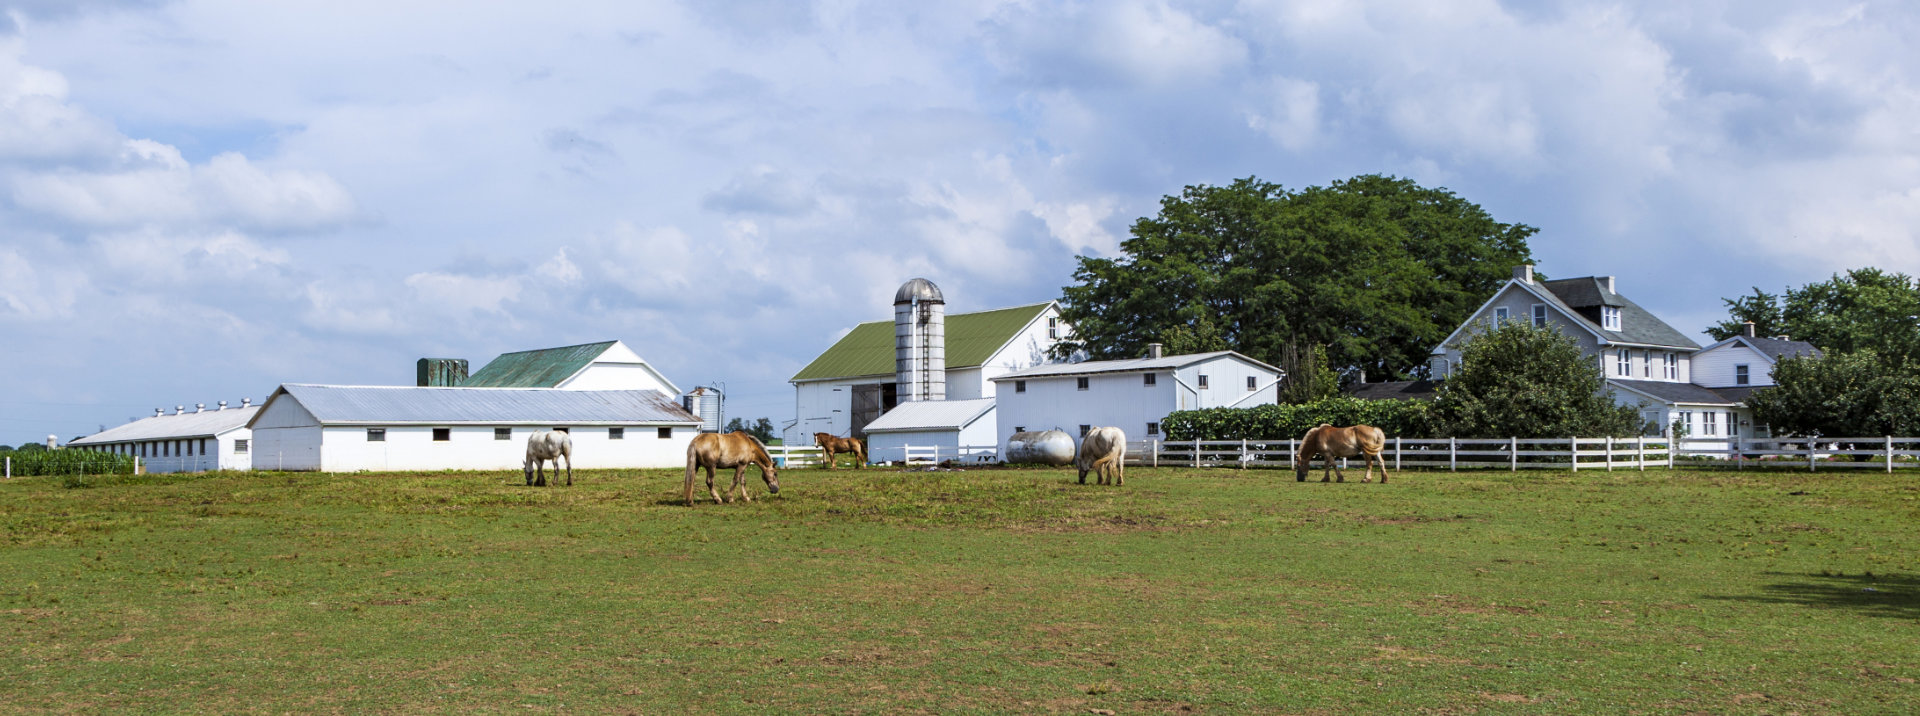 Farm with horses grazing and house and barn in background